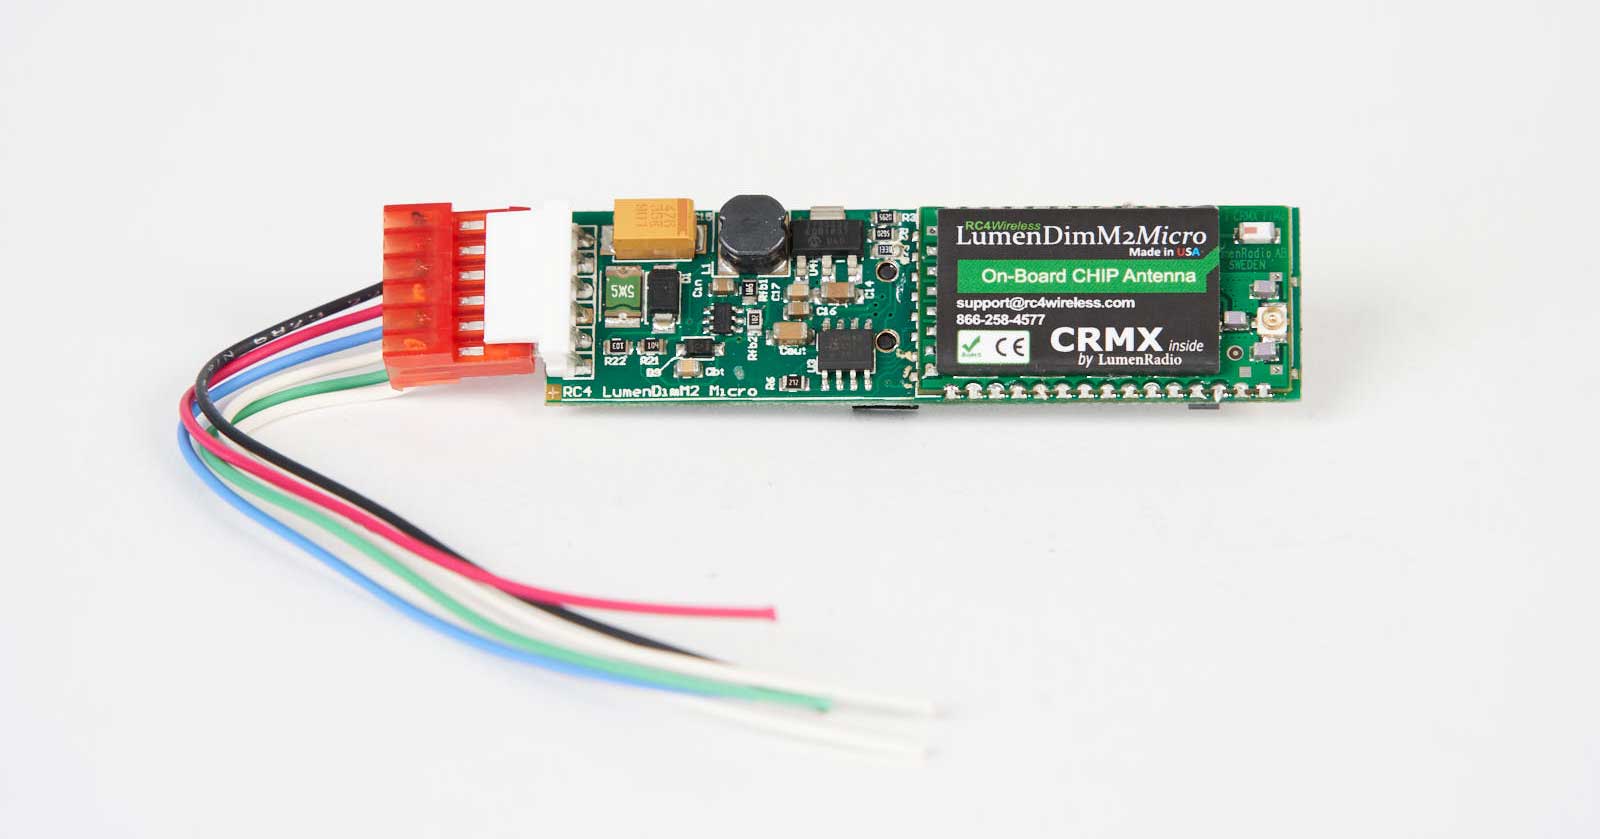 Image of RC4 wireless CRMX DMX 2-channel dimmer LumenDimM2 micro with internal antenna